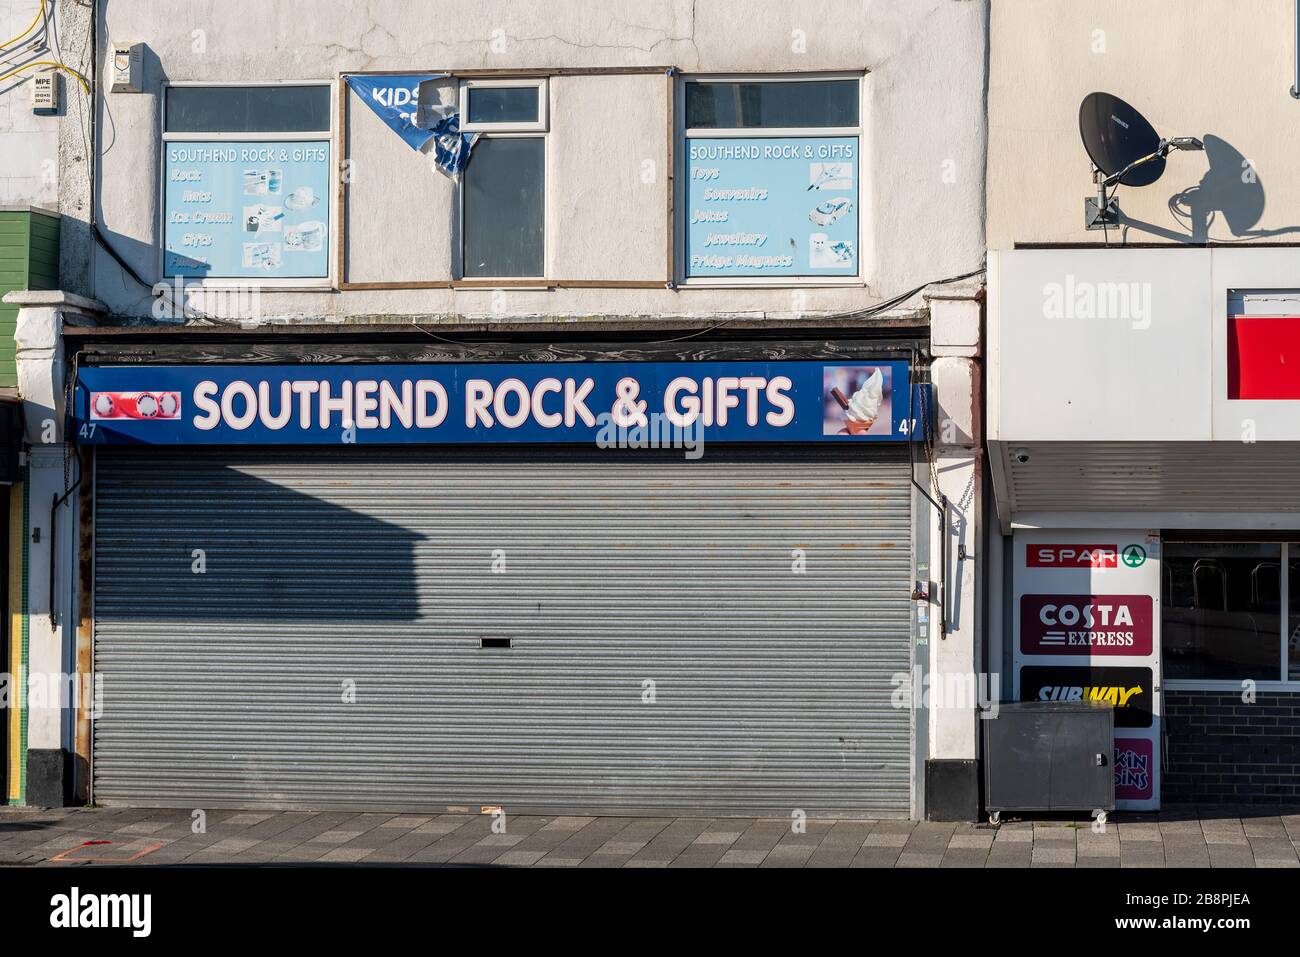 Closed business on Marine Parade, Southend on Sea, Essex, UK, during COVID-19 Coronavirus lockdown social distancing. Southend Rock & Gifts Stock Photo